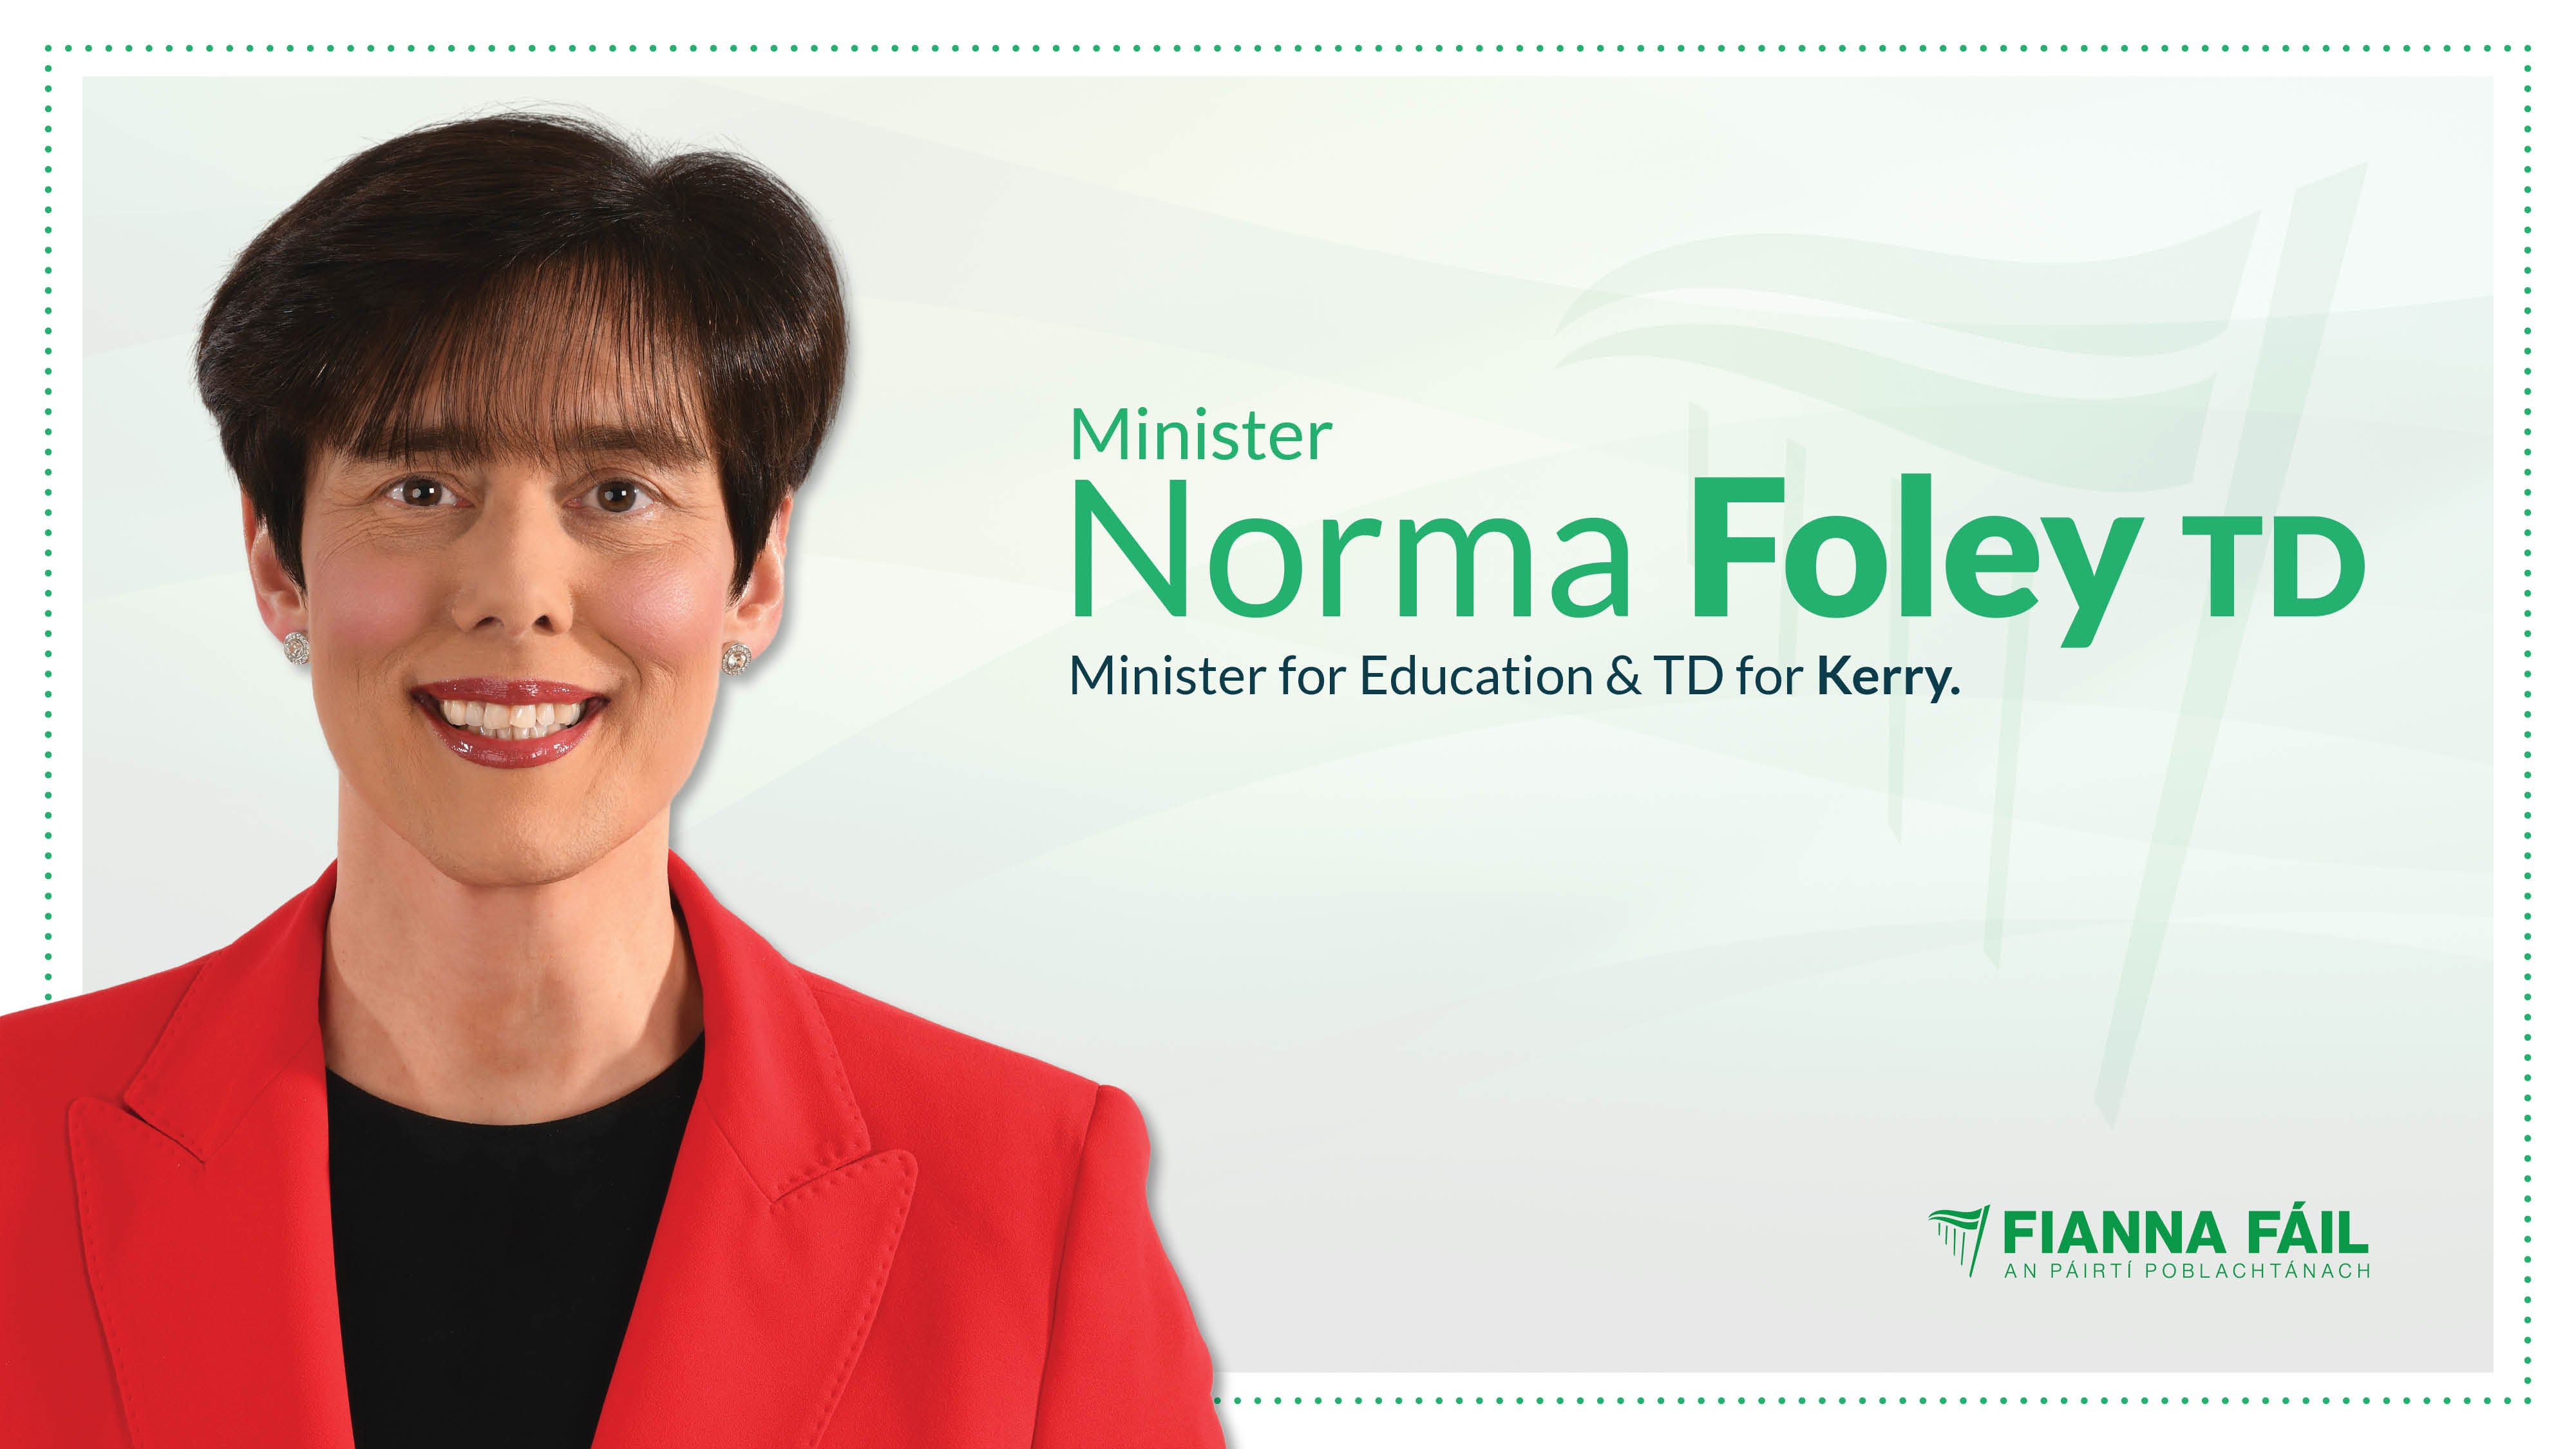 Minister Foley welcomes the phased return of in-school teaching and learning for students commencing Monday, 1 March